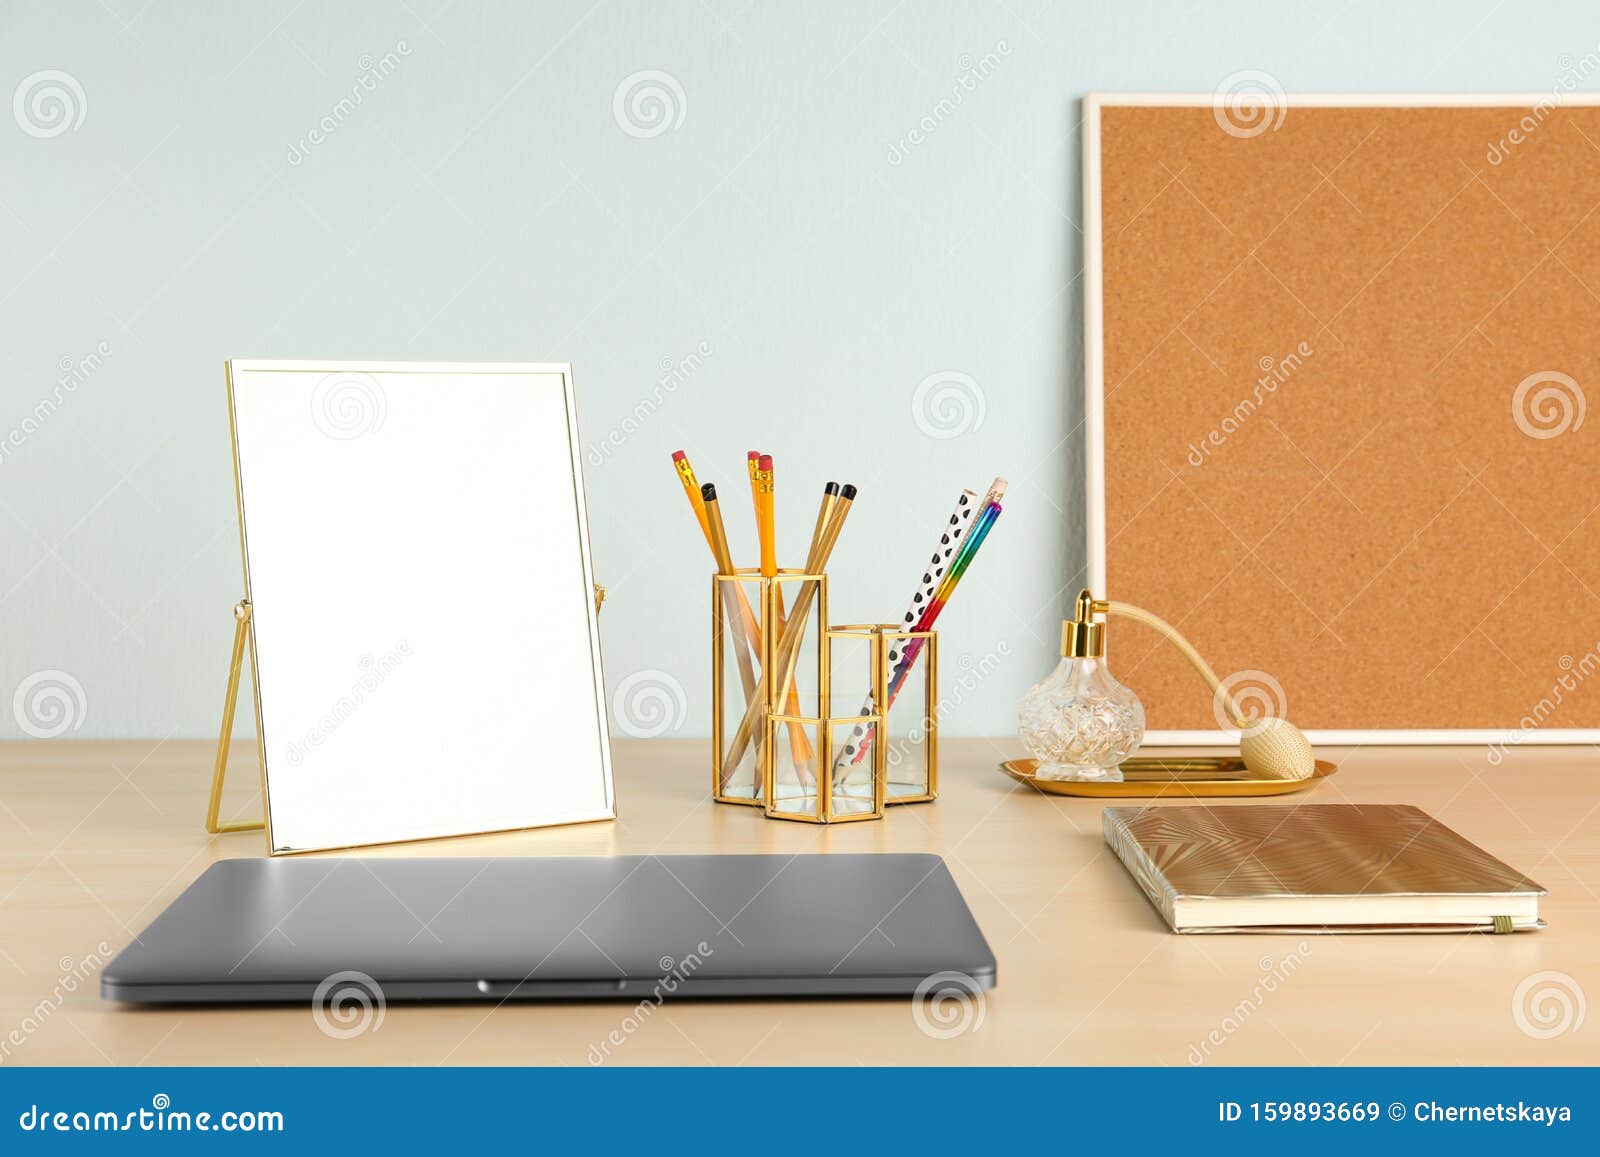 Modern Workplace with Laptop and Golden Decor on Desk. Stylish Interior ...